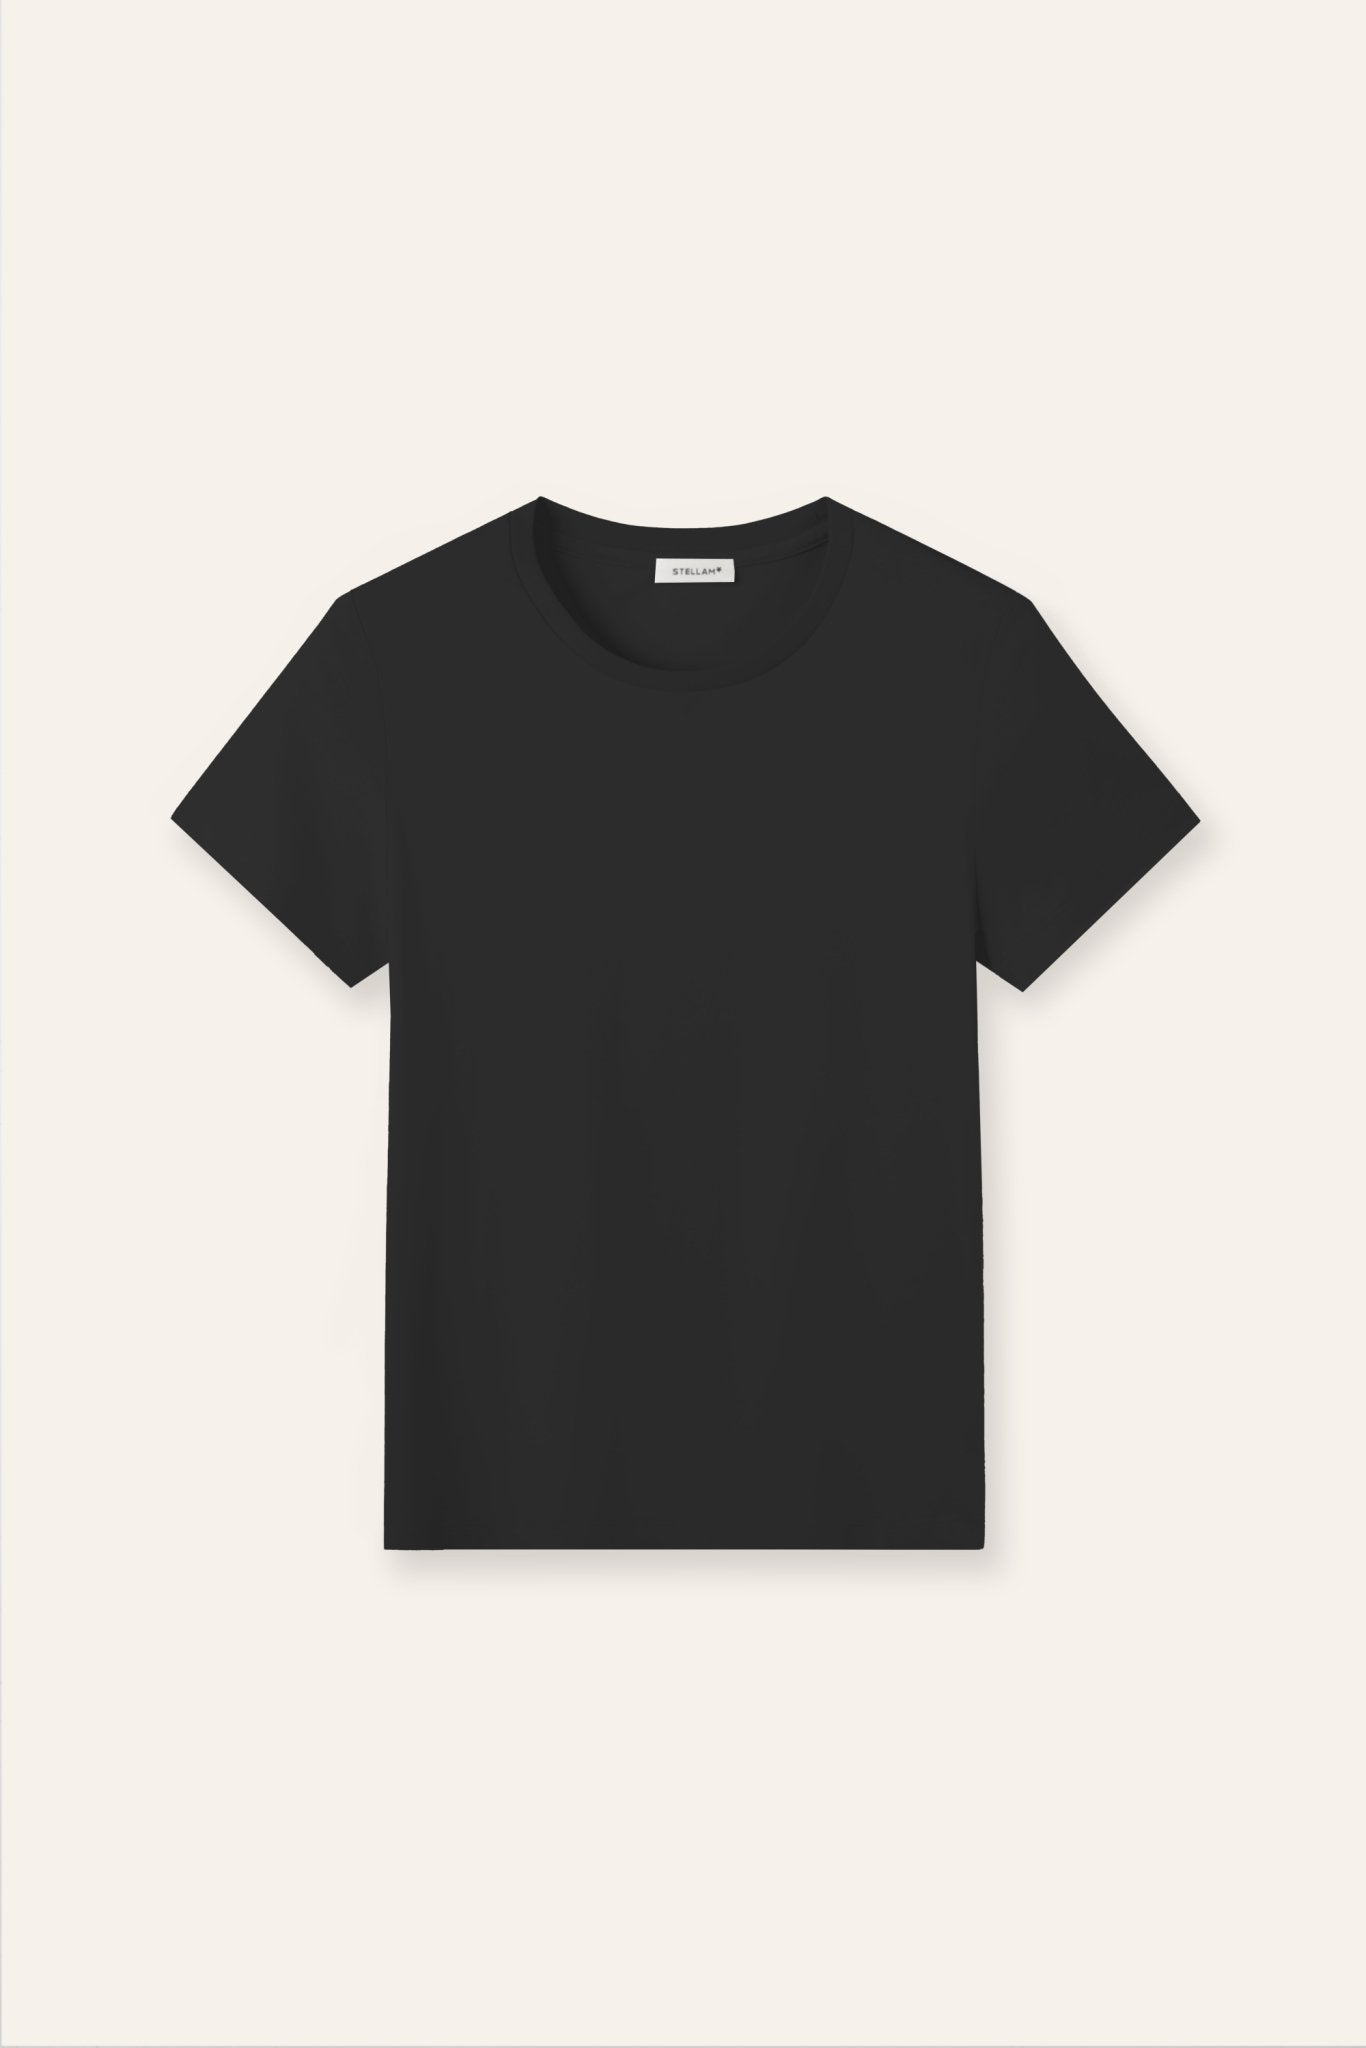 SIGNATURE relaxed jersey tee (Black) - STELLAM